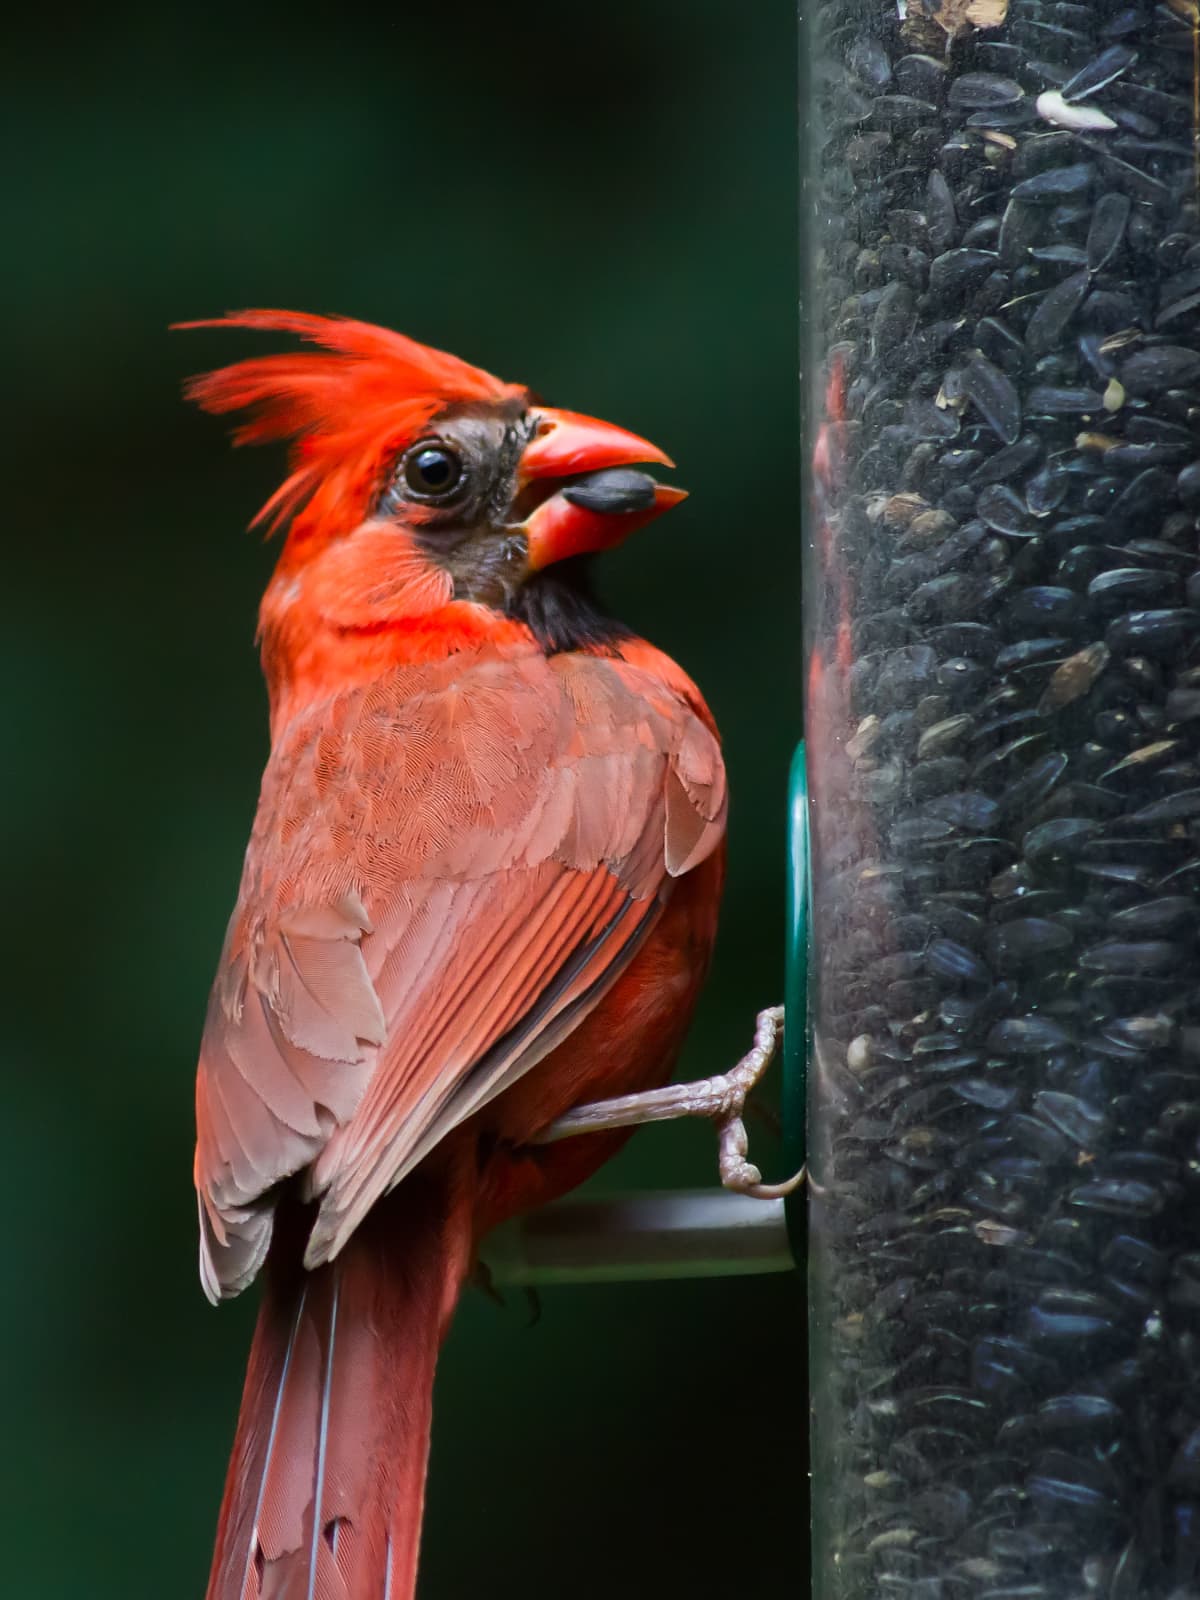 Red male cardinal with seed in its beak perched on a bird feeder